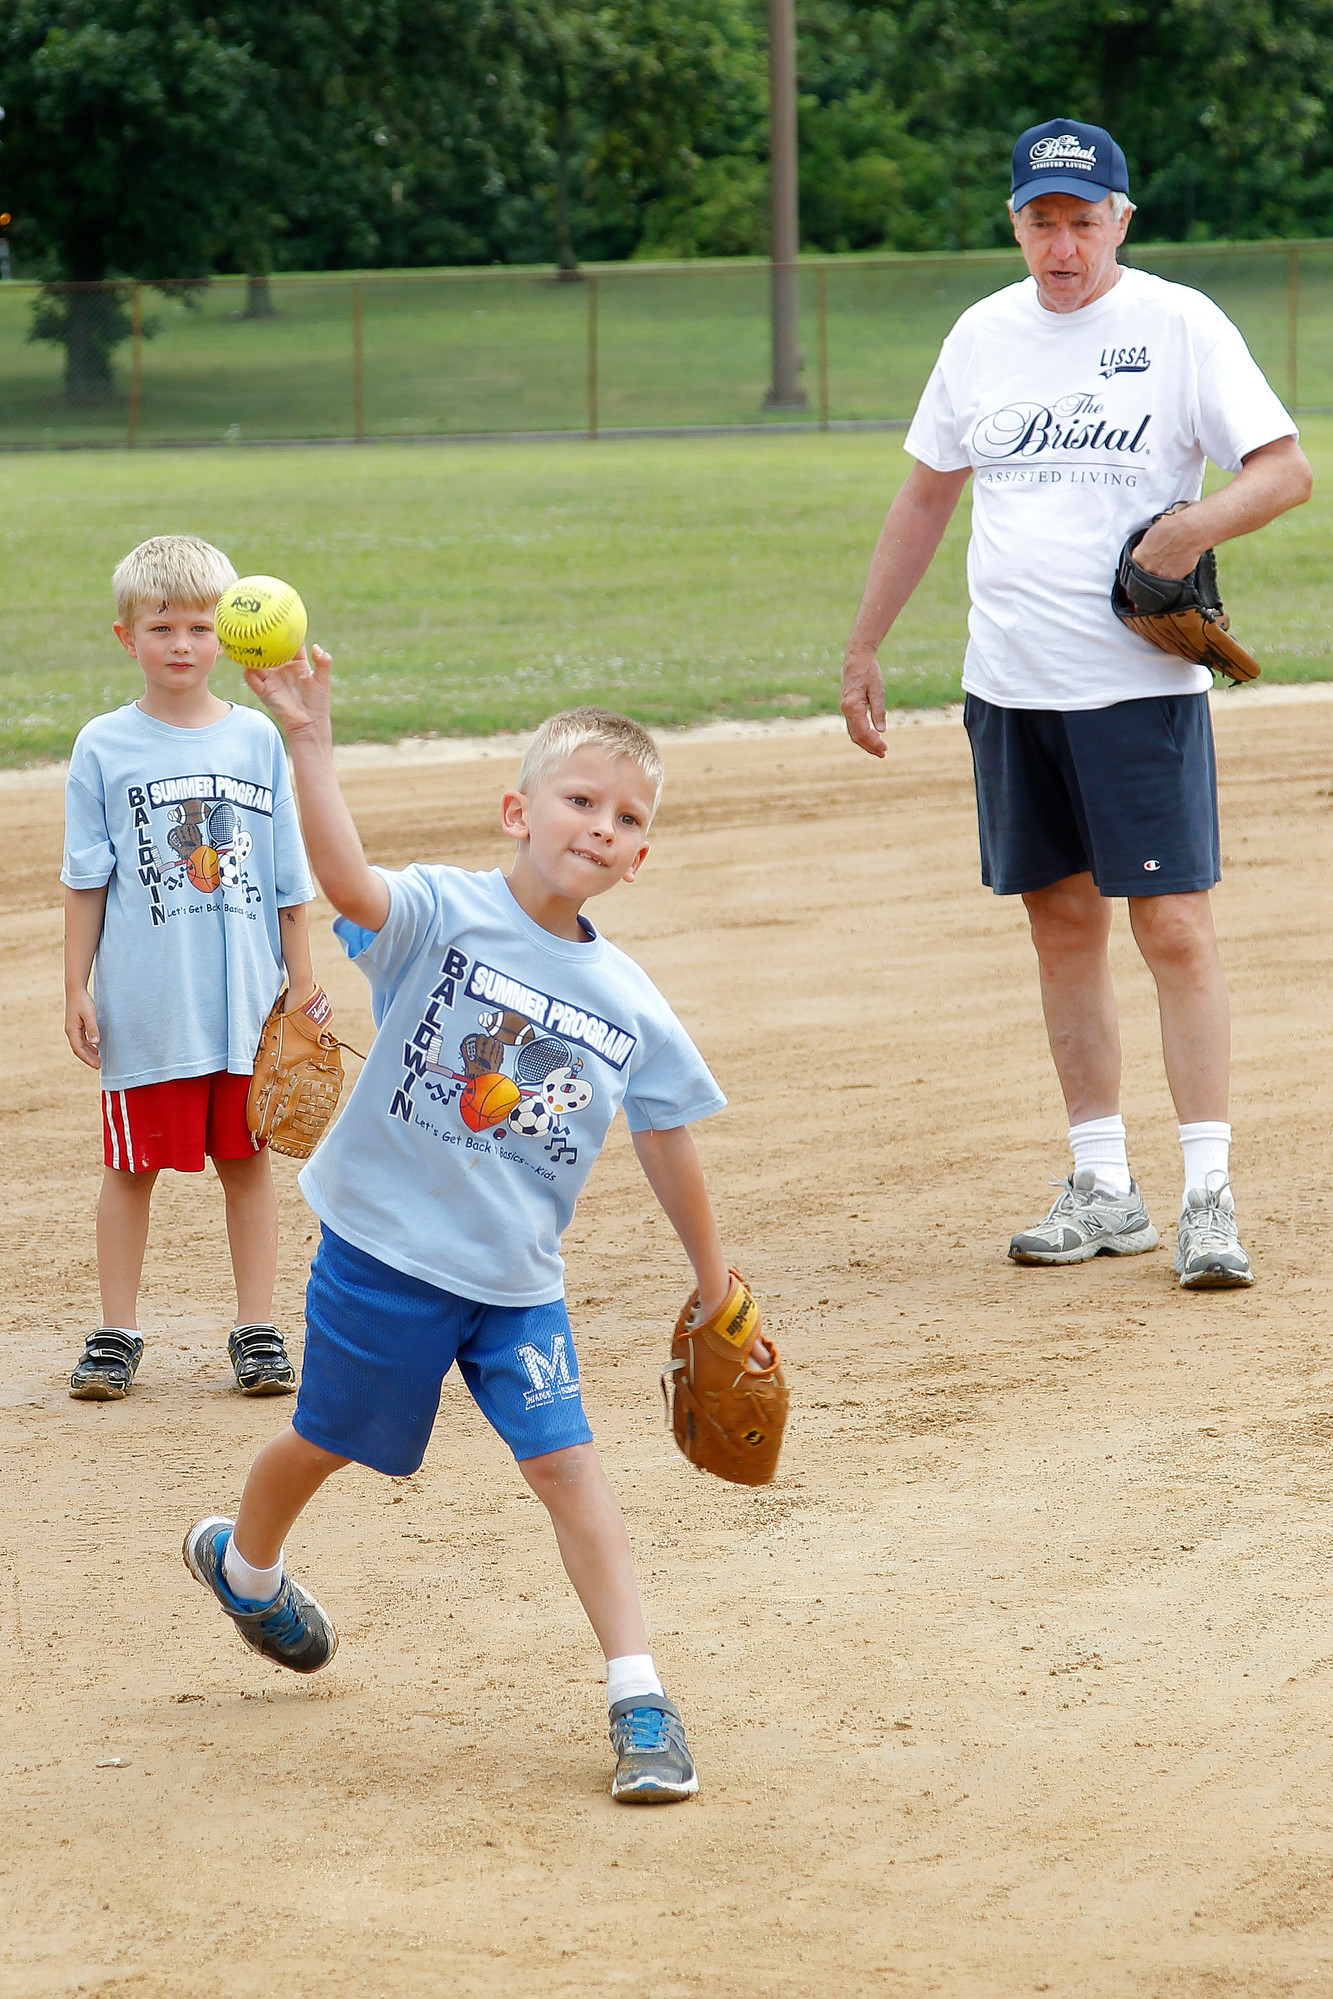 William Lomot, 6, center, practiced his throws from third base during a practice on July 16 at Baldwin Park with his teammate Jacob Stevenson, 7.